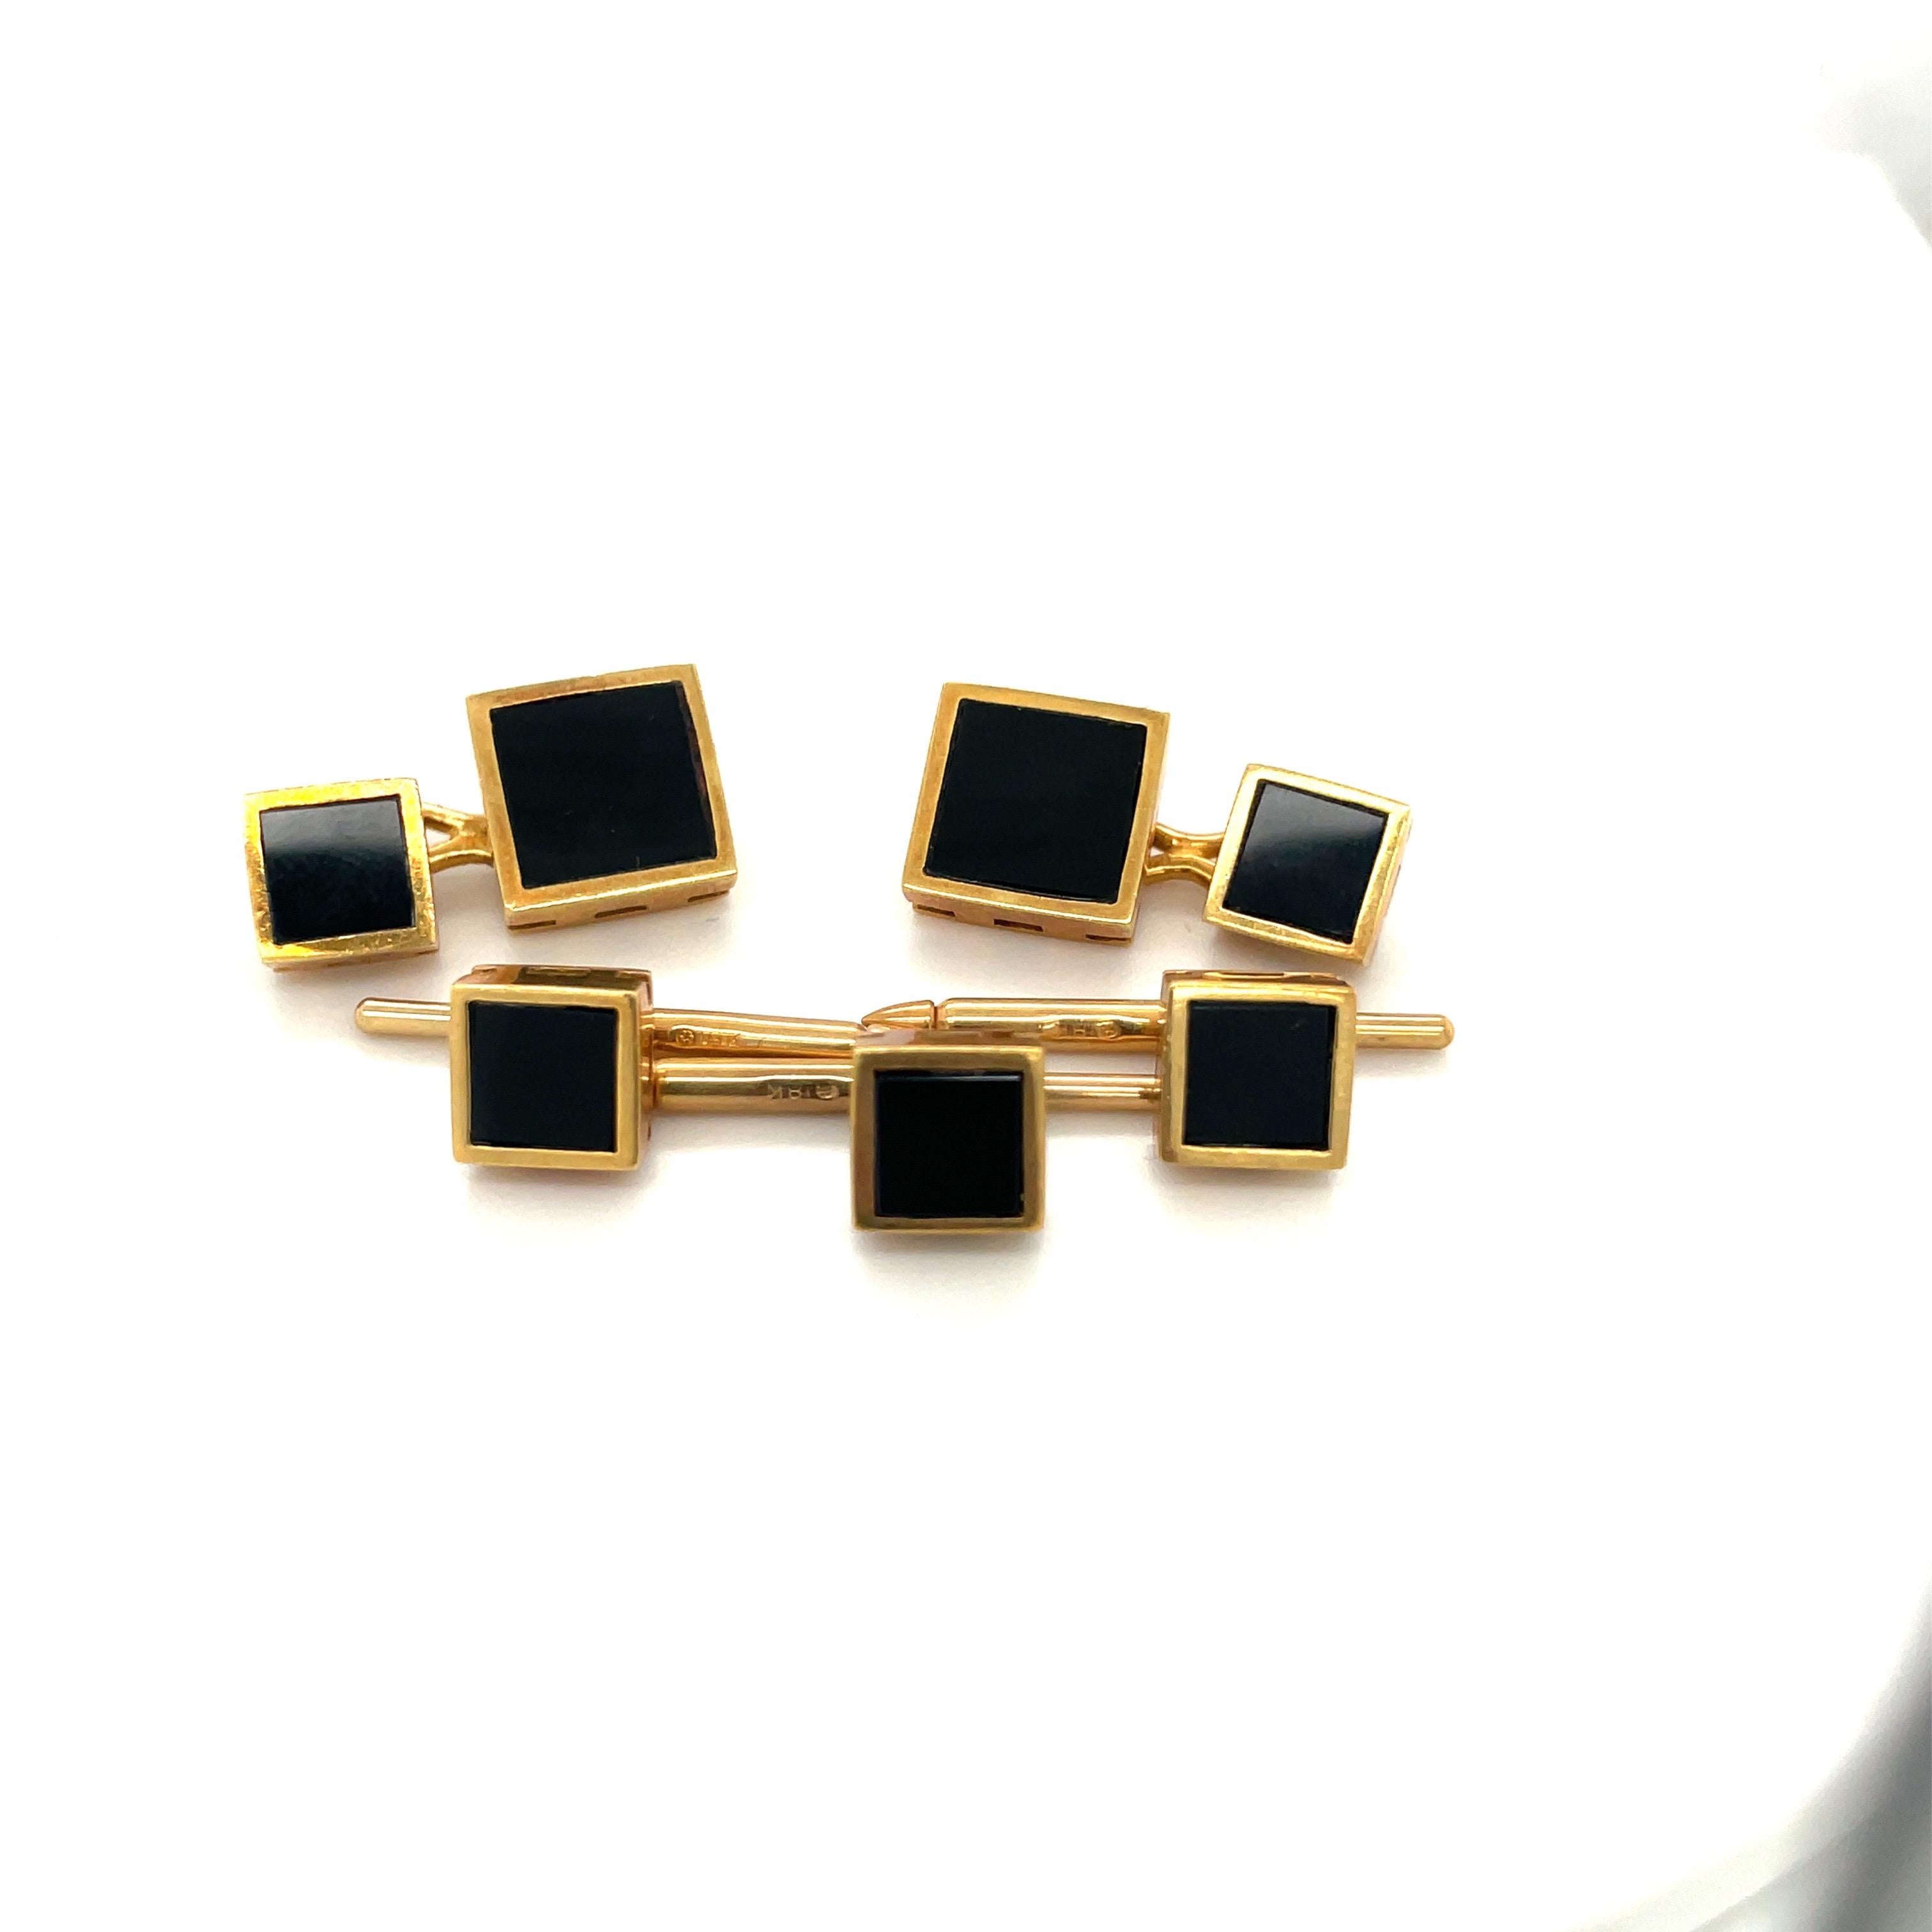 Classic 18 karat yellow gold square cuff links and studs set with black onyx. The link style cuff links measure 10.5 mm. The studs (3) measure 7.5mm.
Signed Cartier 18k with the jewelers hallmark